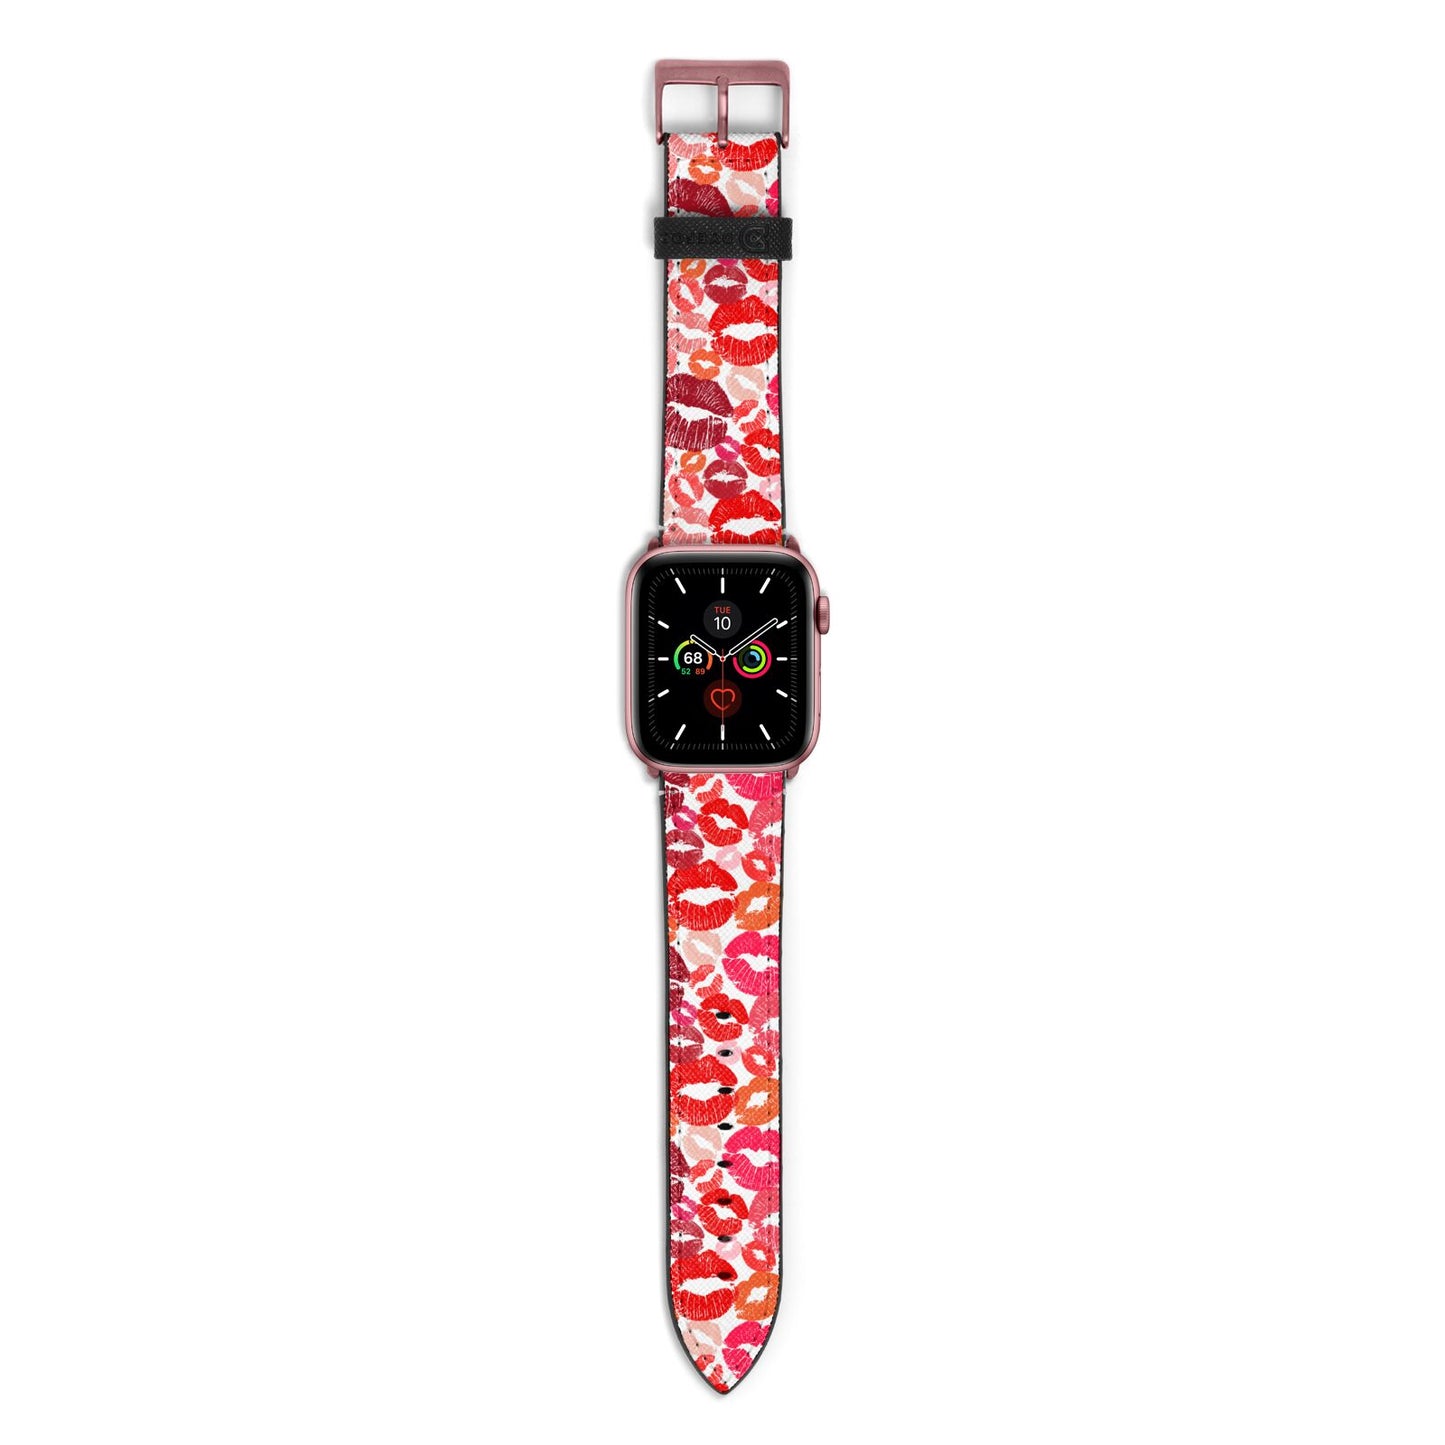 Kiss Print Apple Watch Strap with Rose Gold Hardware